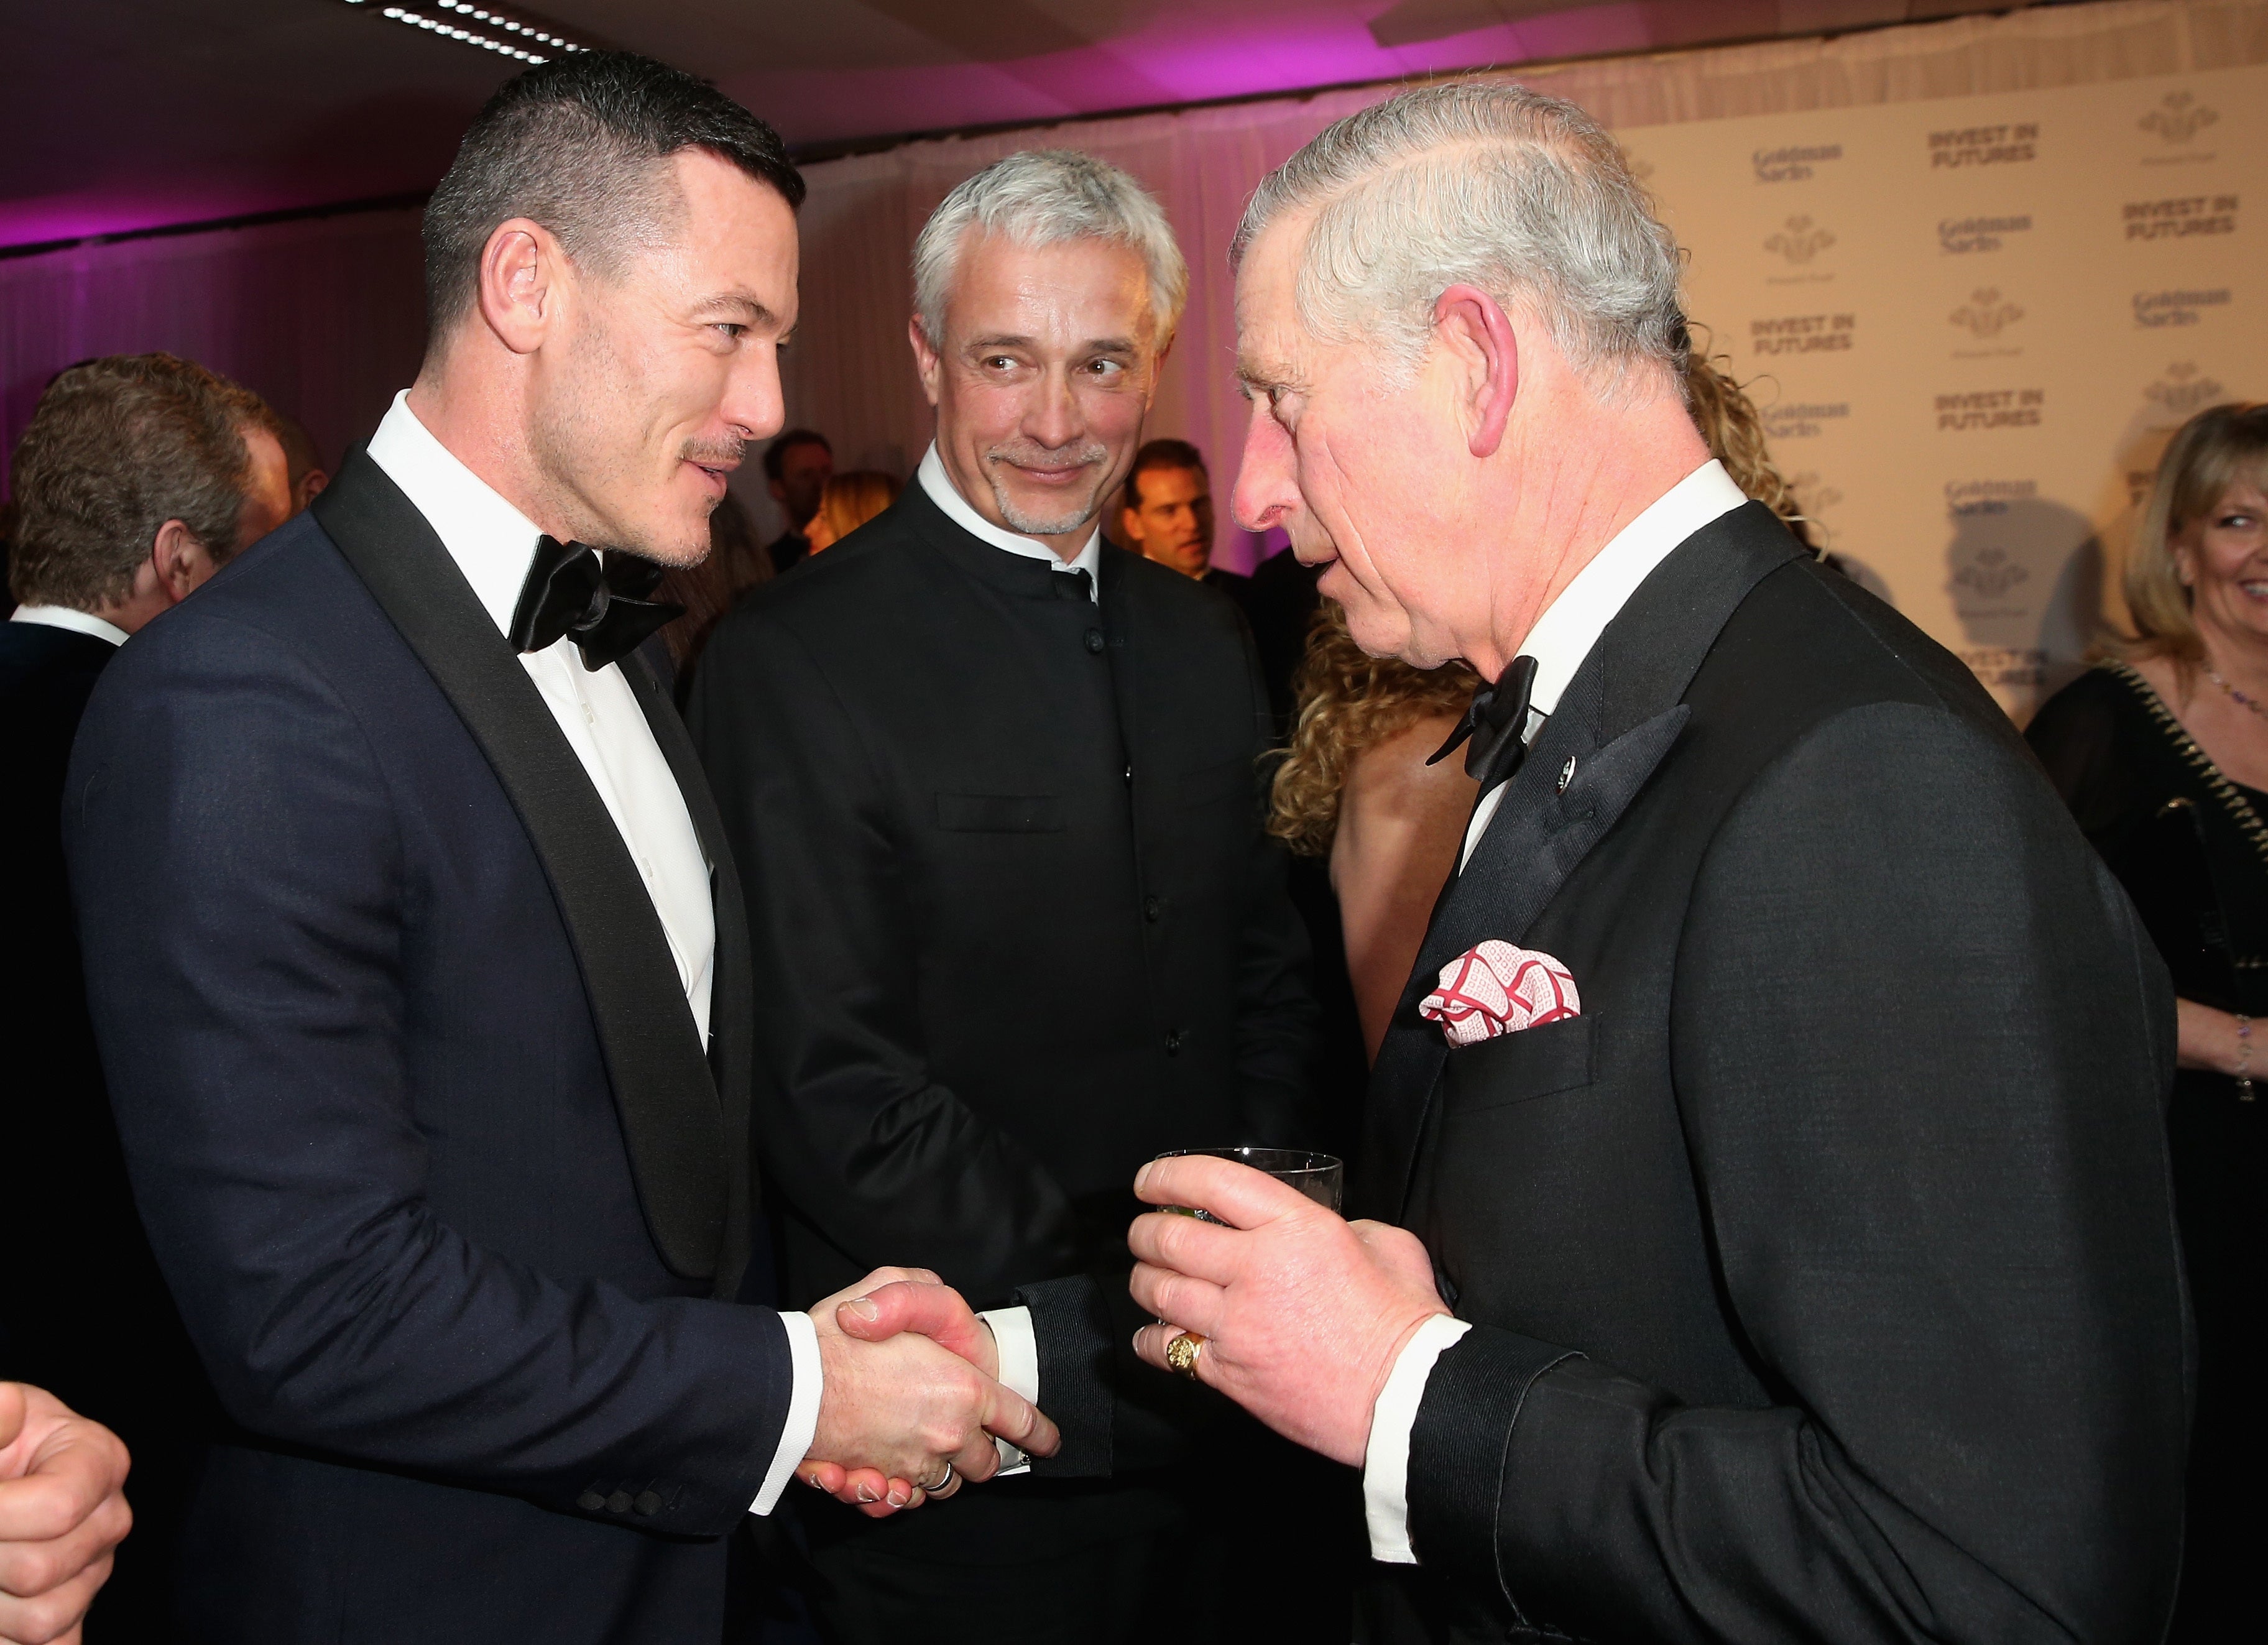 Luke Evans talks to the Prince of Wales – now King Charles III – as they attend a pre-dinner reception for the Prince’s Trust Invest in Futures Gala Dinner at The Old Billingsgate in London in 2016 (Chris Jackson/PA)